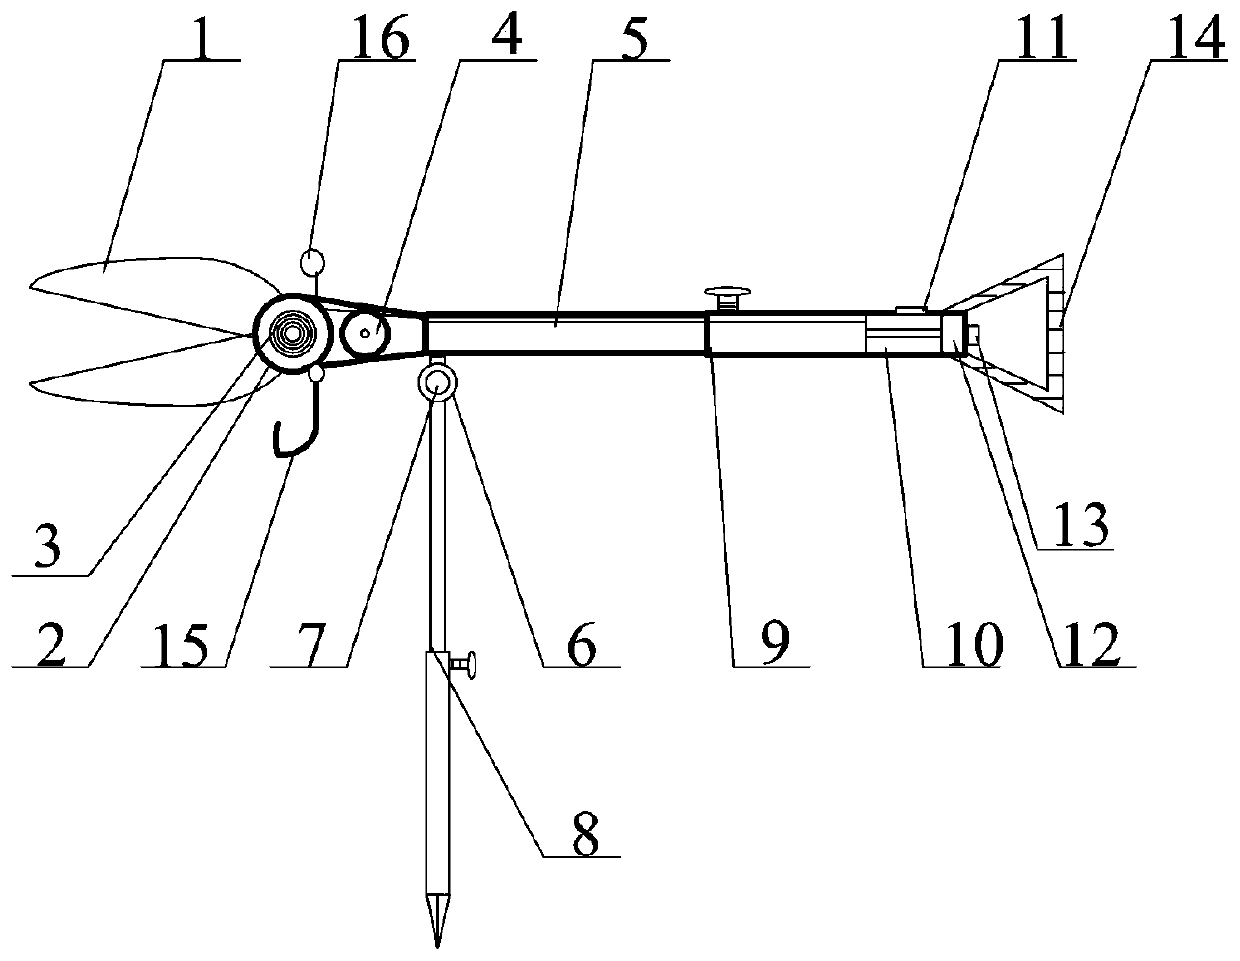 Fruit tree trimming device